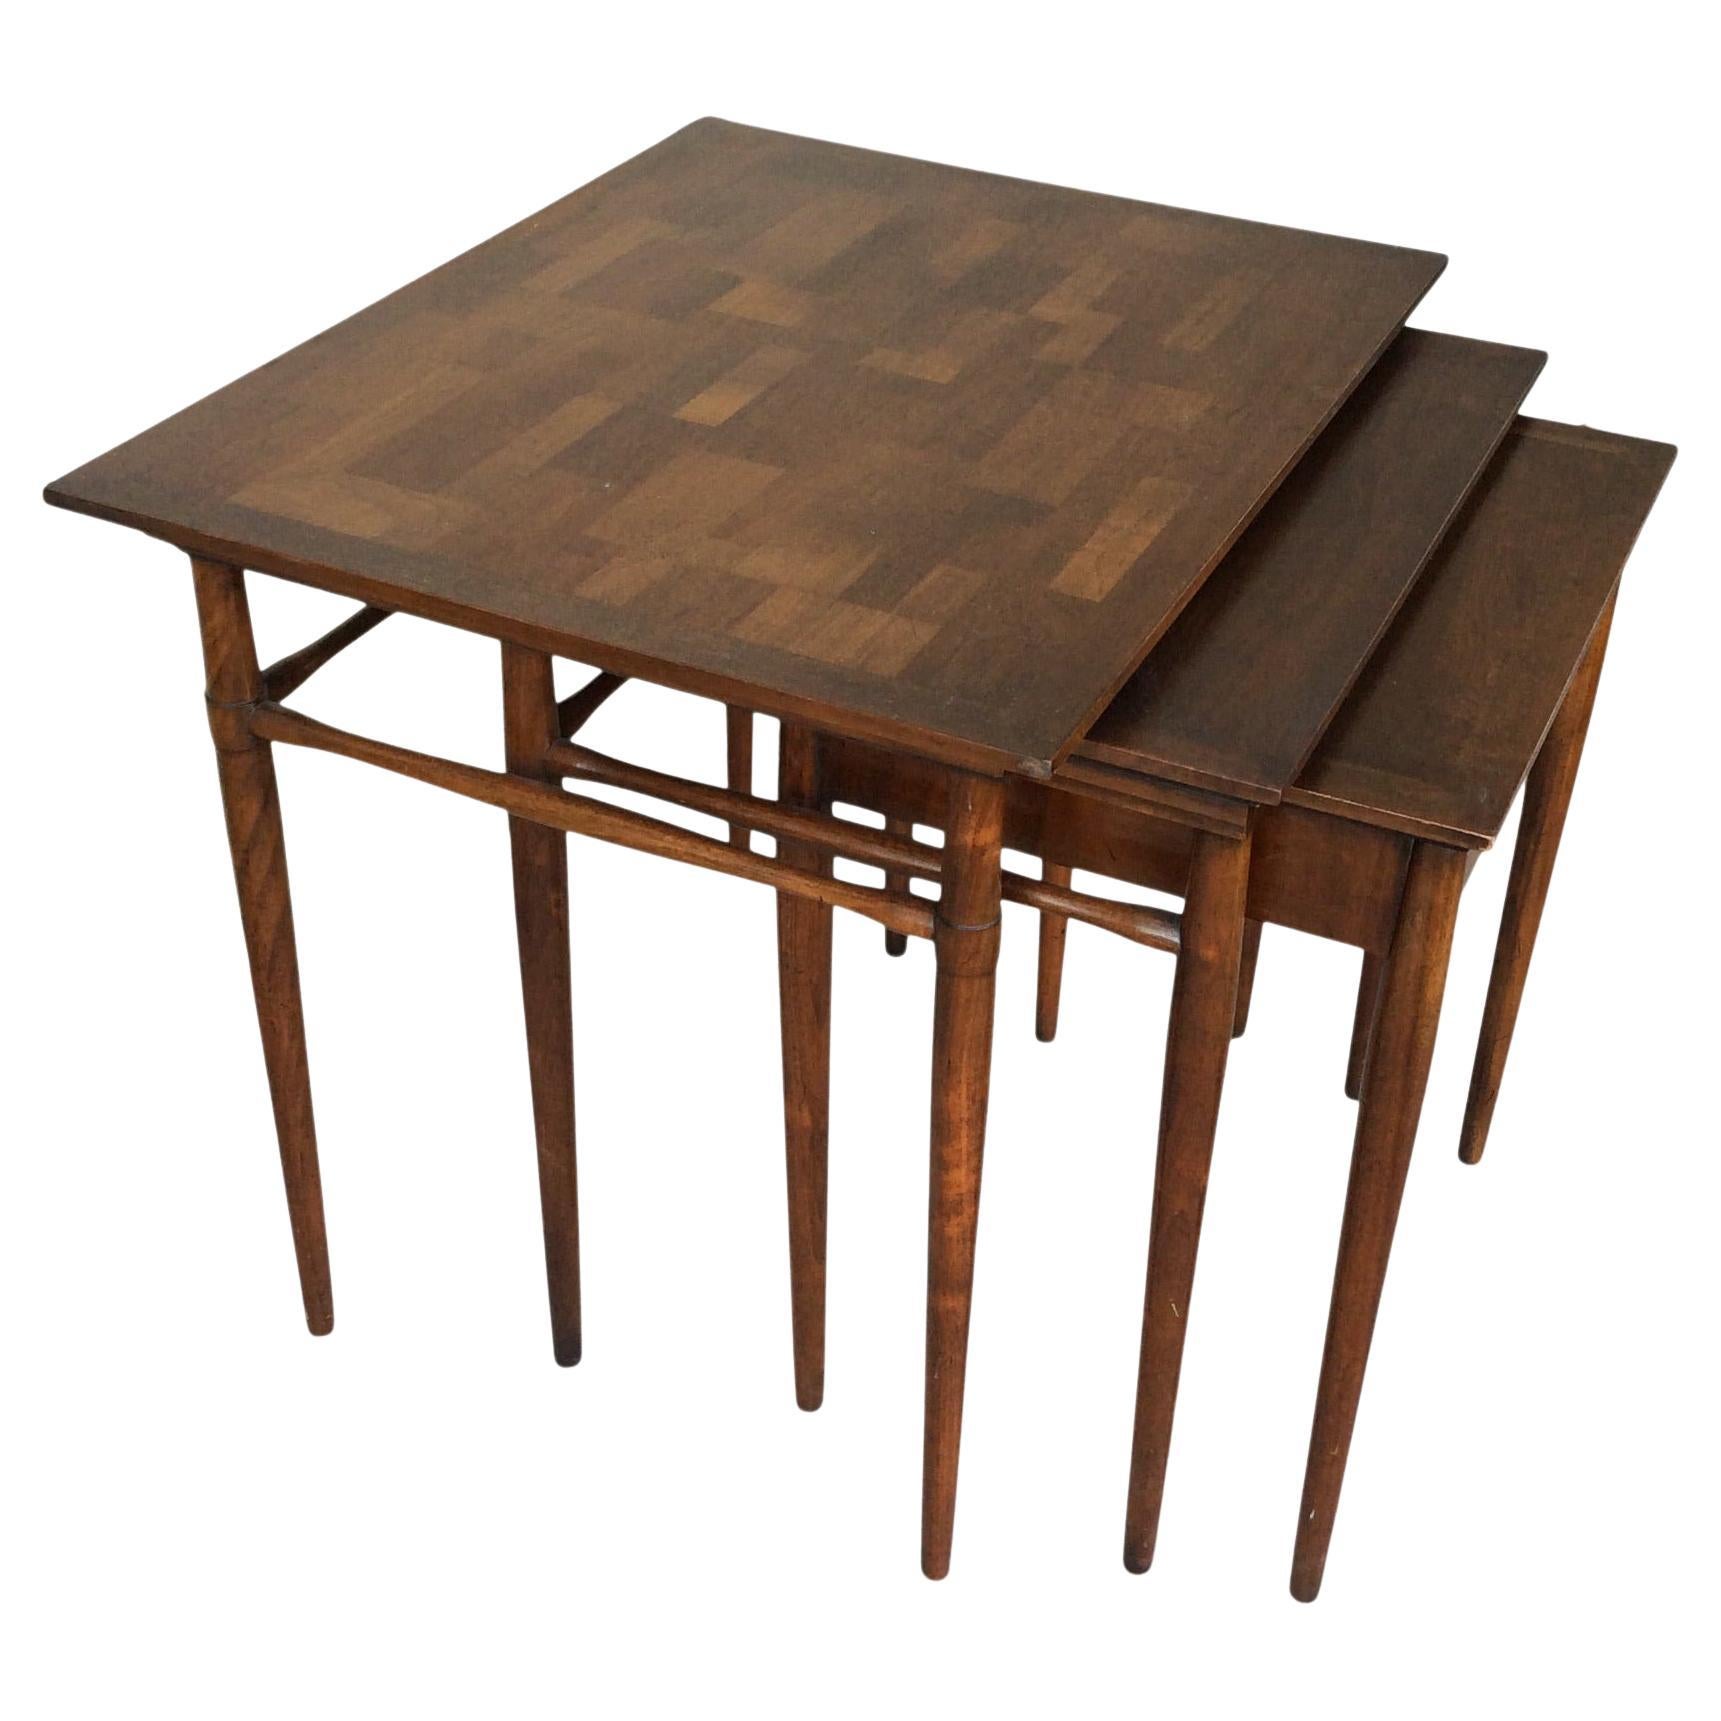 Vintage Mid-Century Modern Wood Nesting Tables, 3 Pieces